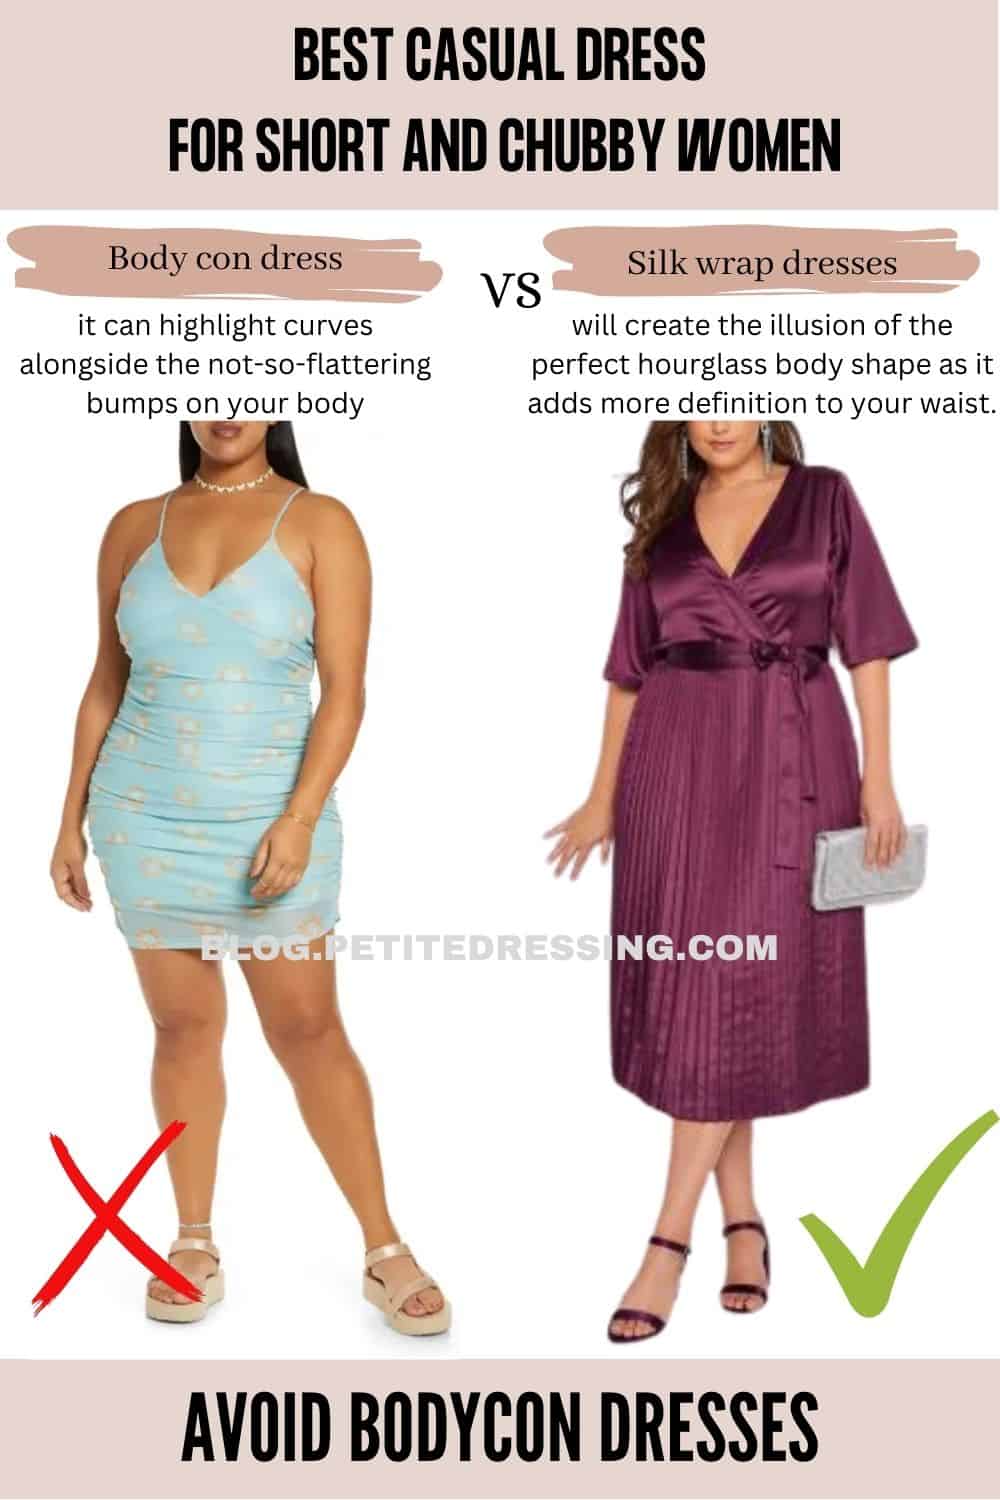 Casual dress guide for short and chubby women